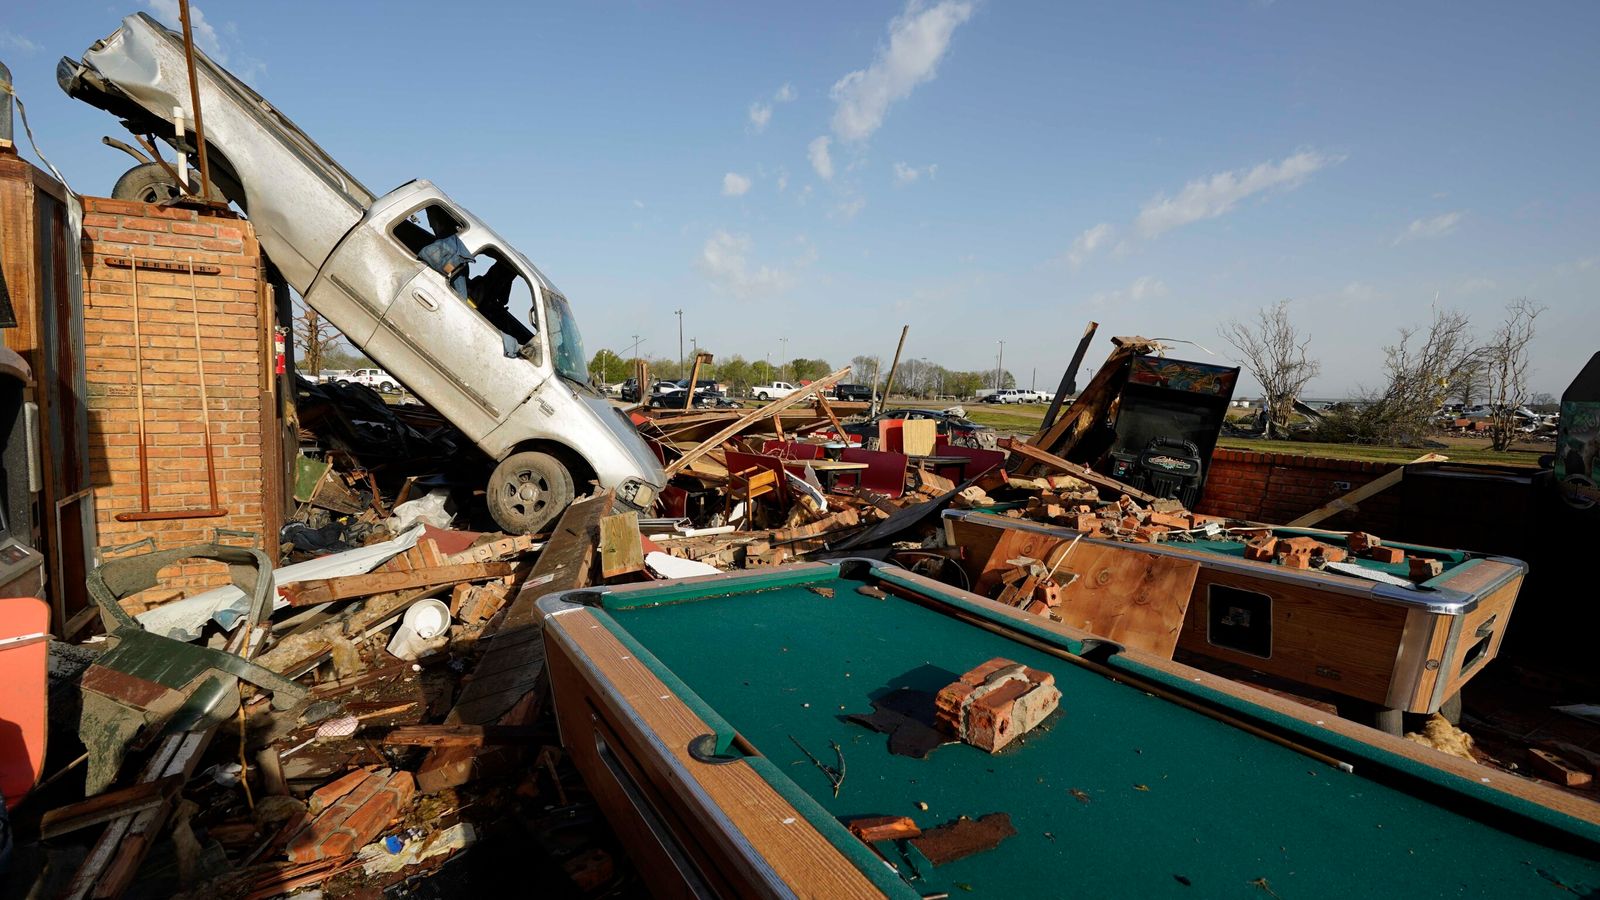 Tornado kills at least 26 as it tears through southern US states during